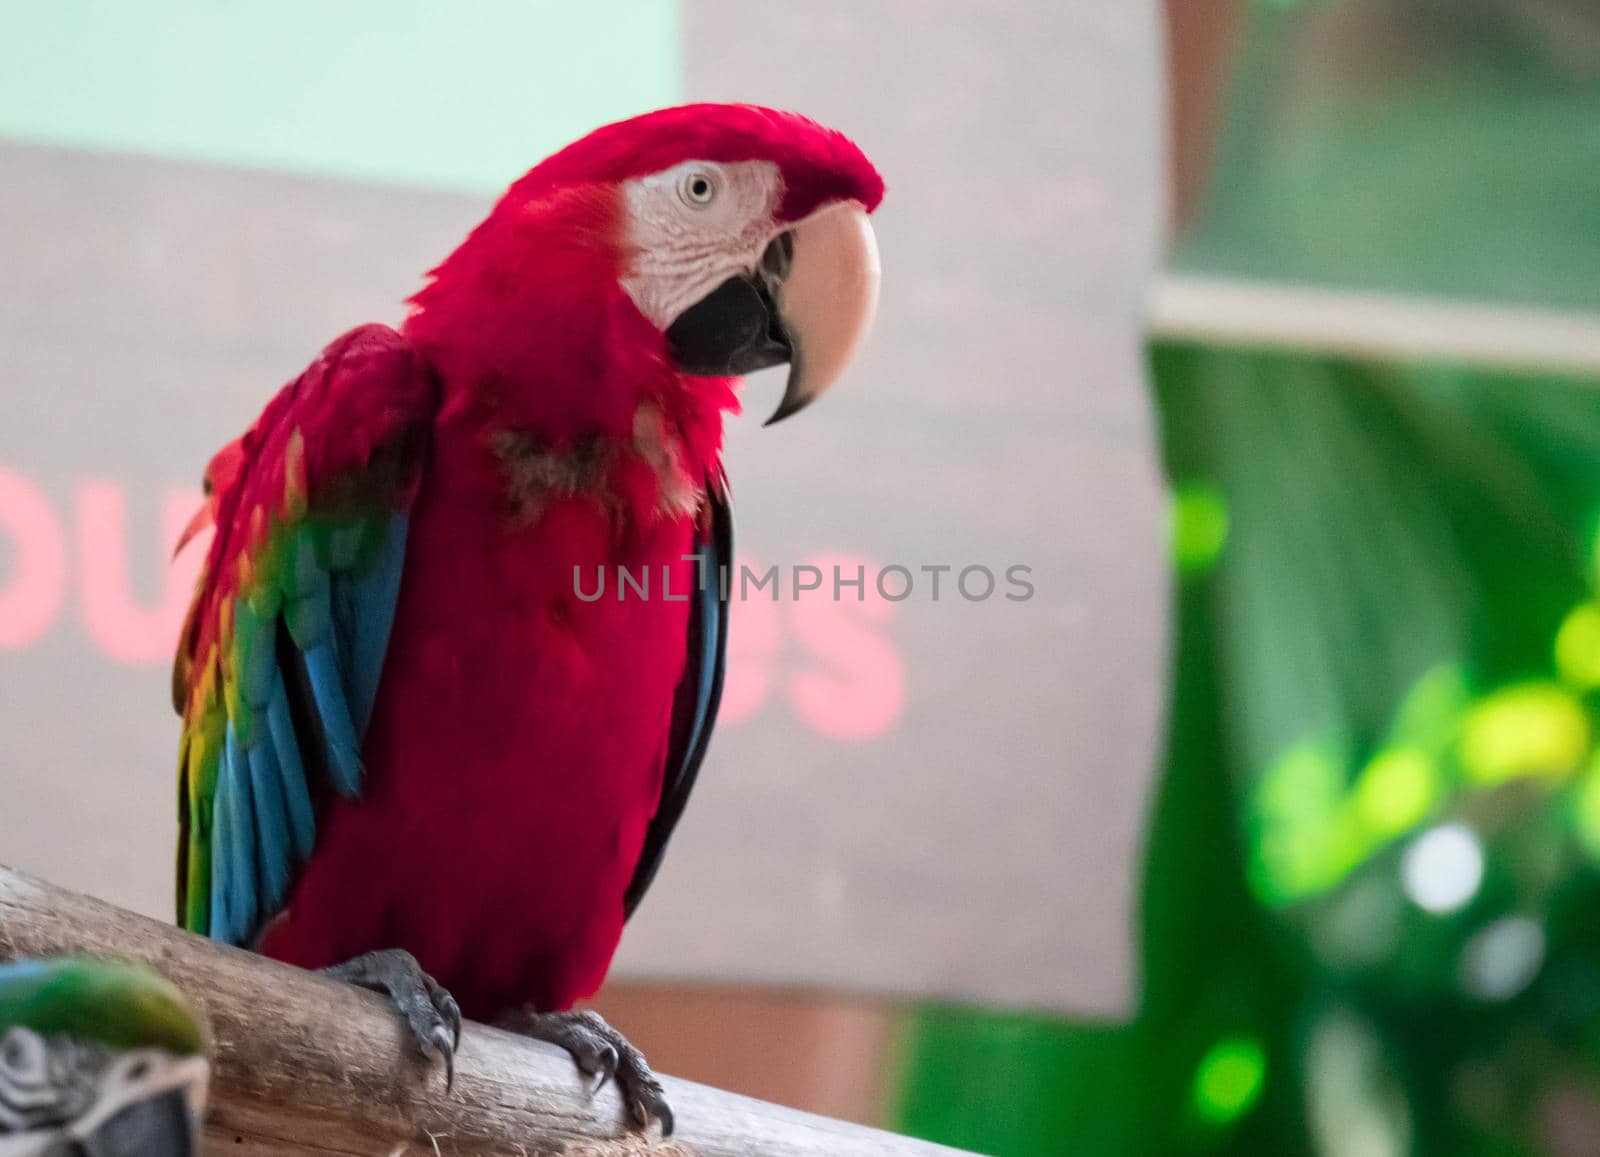 The Scarlet Macaw - Ara macao, large beautiful colorful parrot from Central America forests, Costa Rica